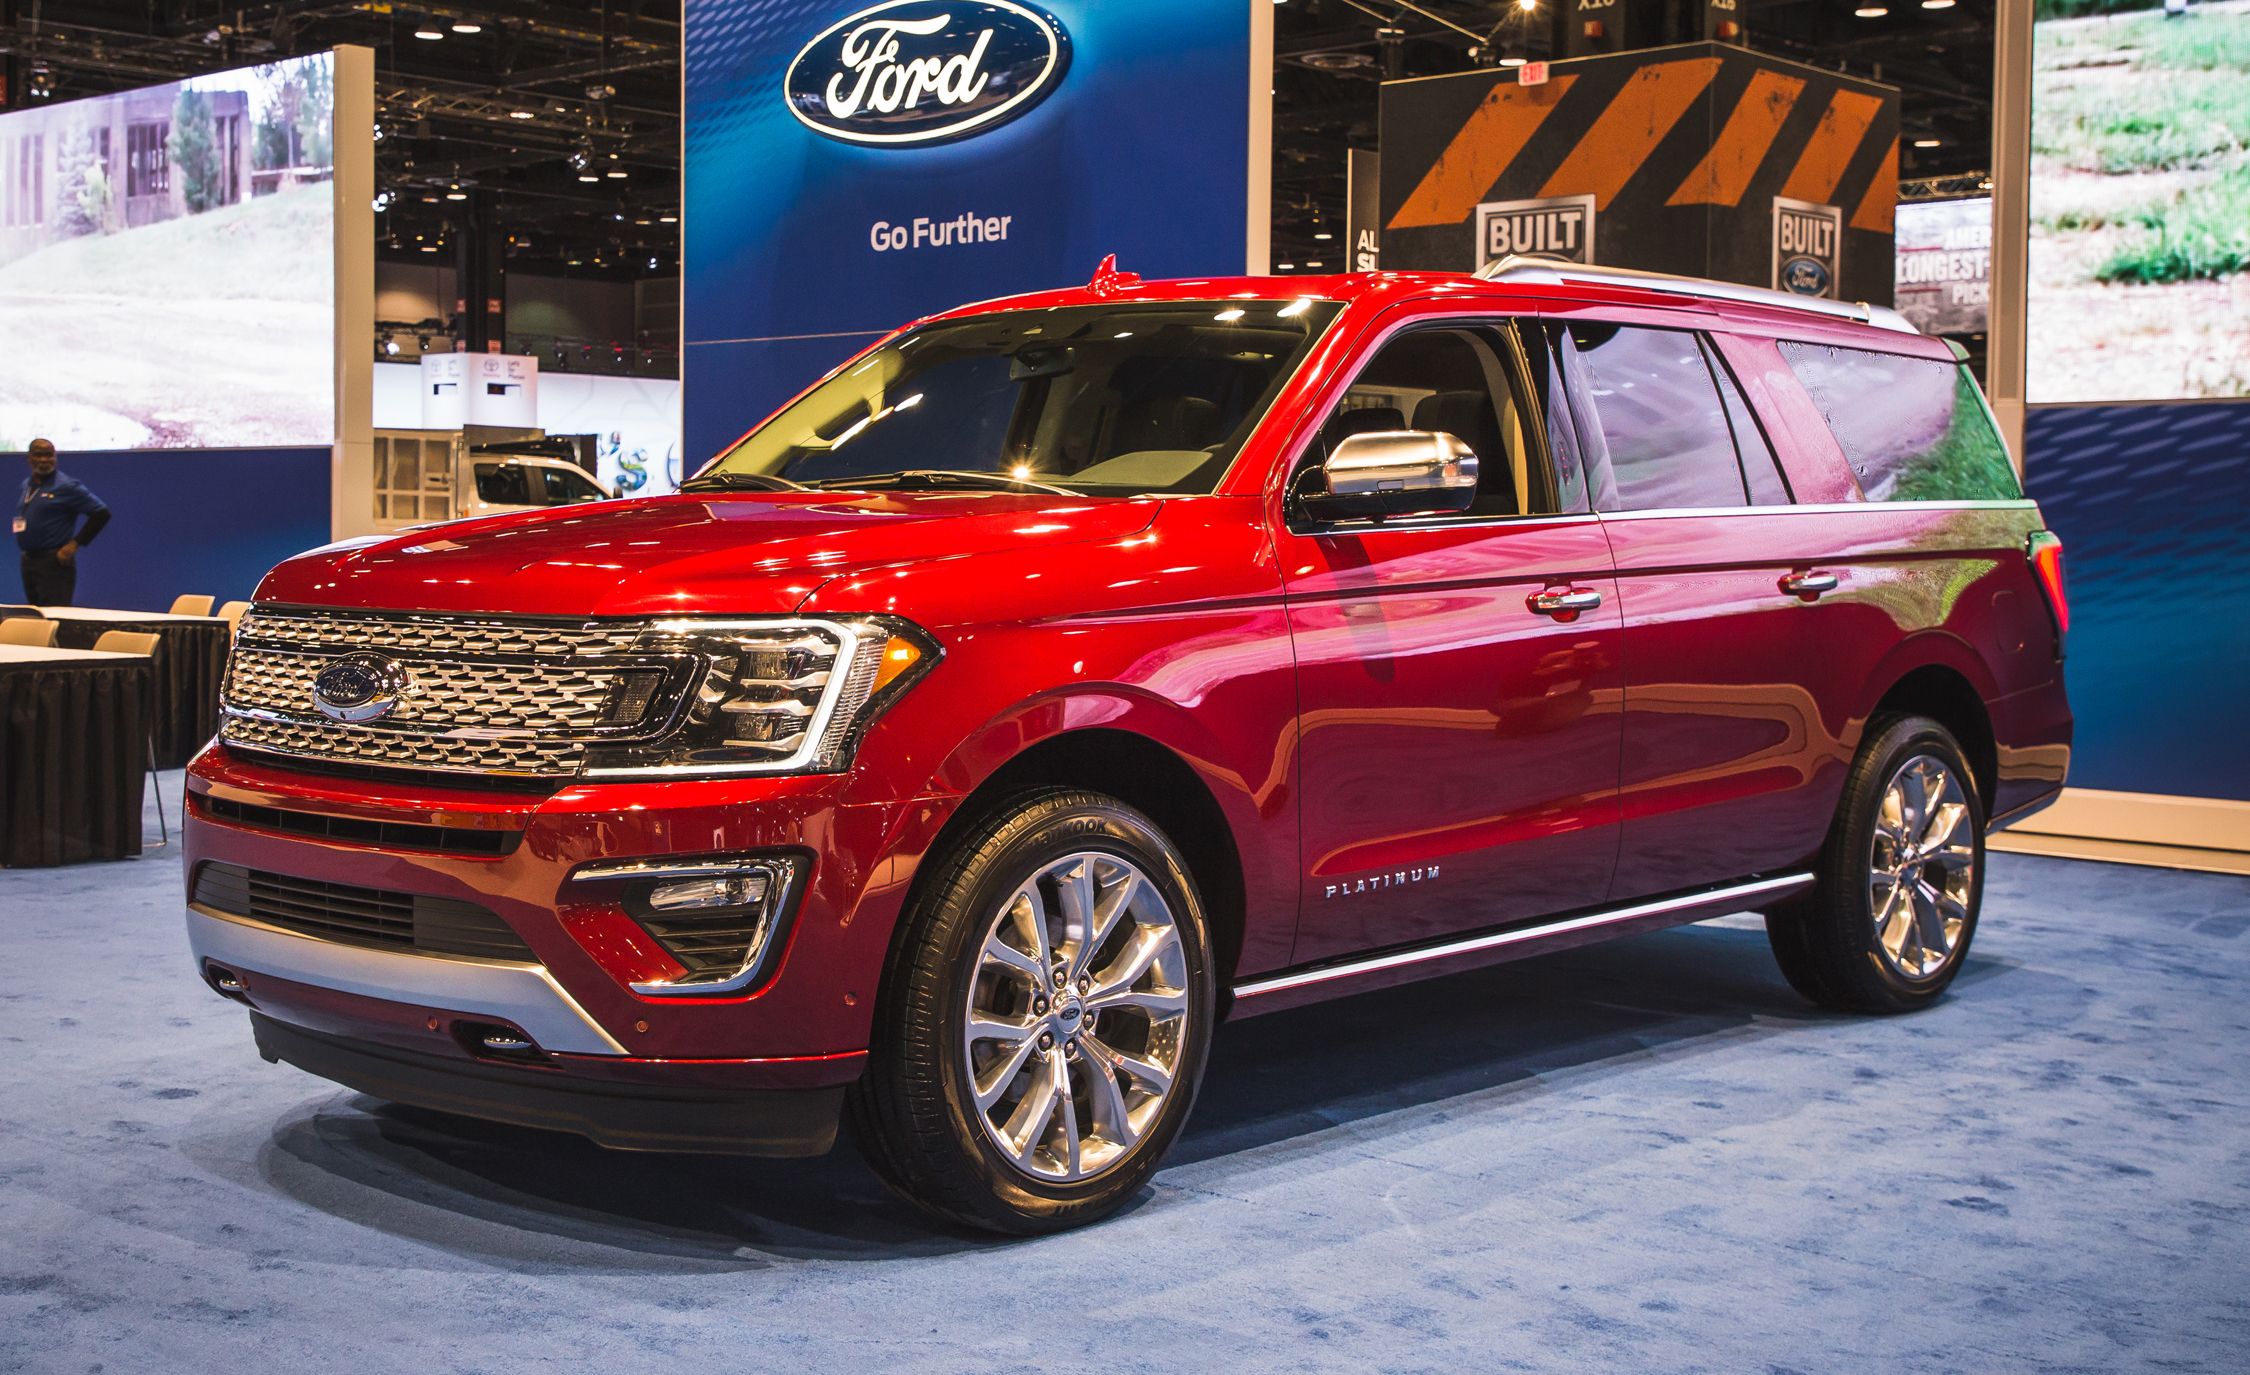 Pictures Of 2014 New Cars Trucks And Suvs | Autos Post